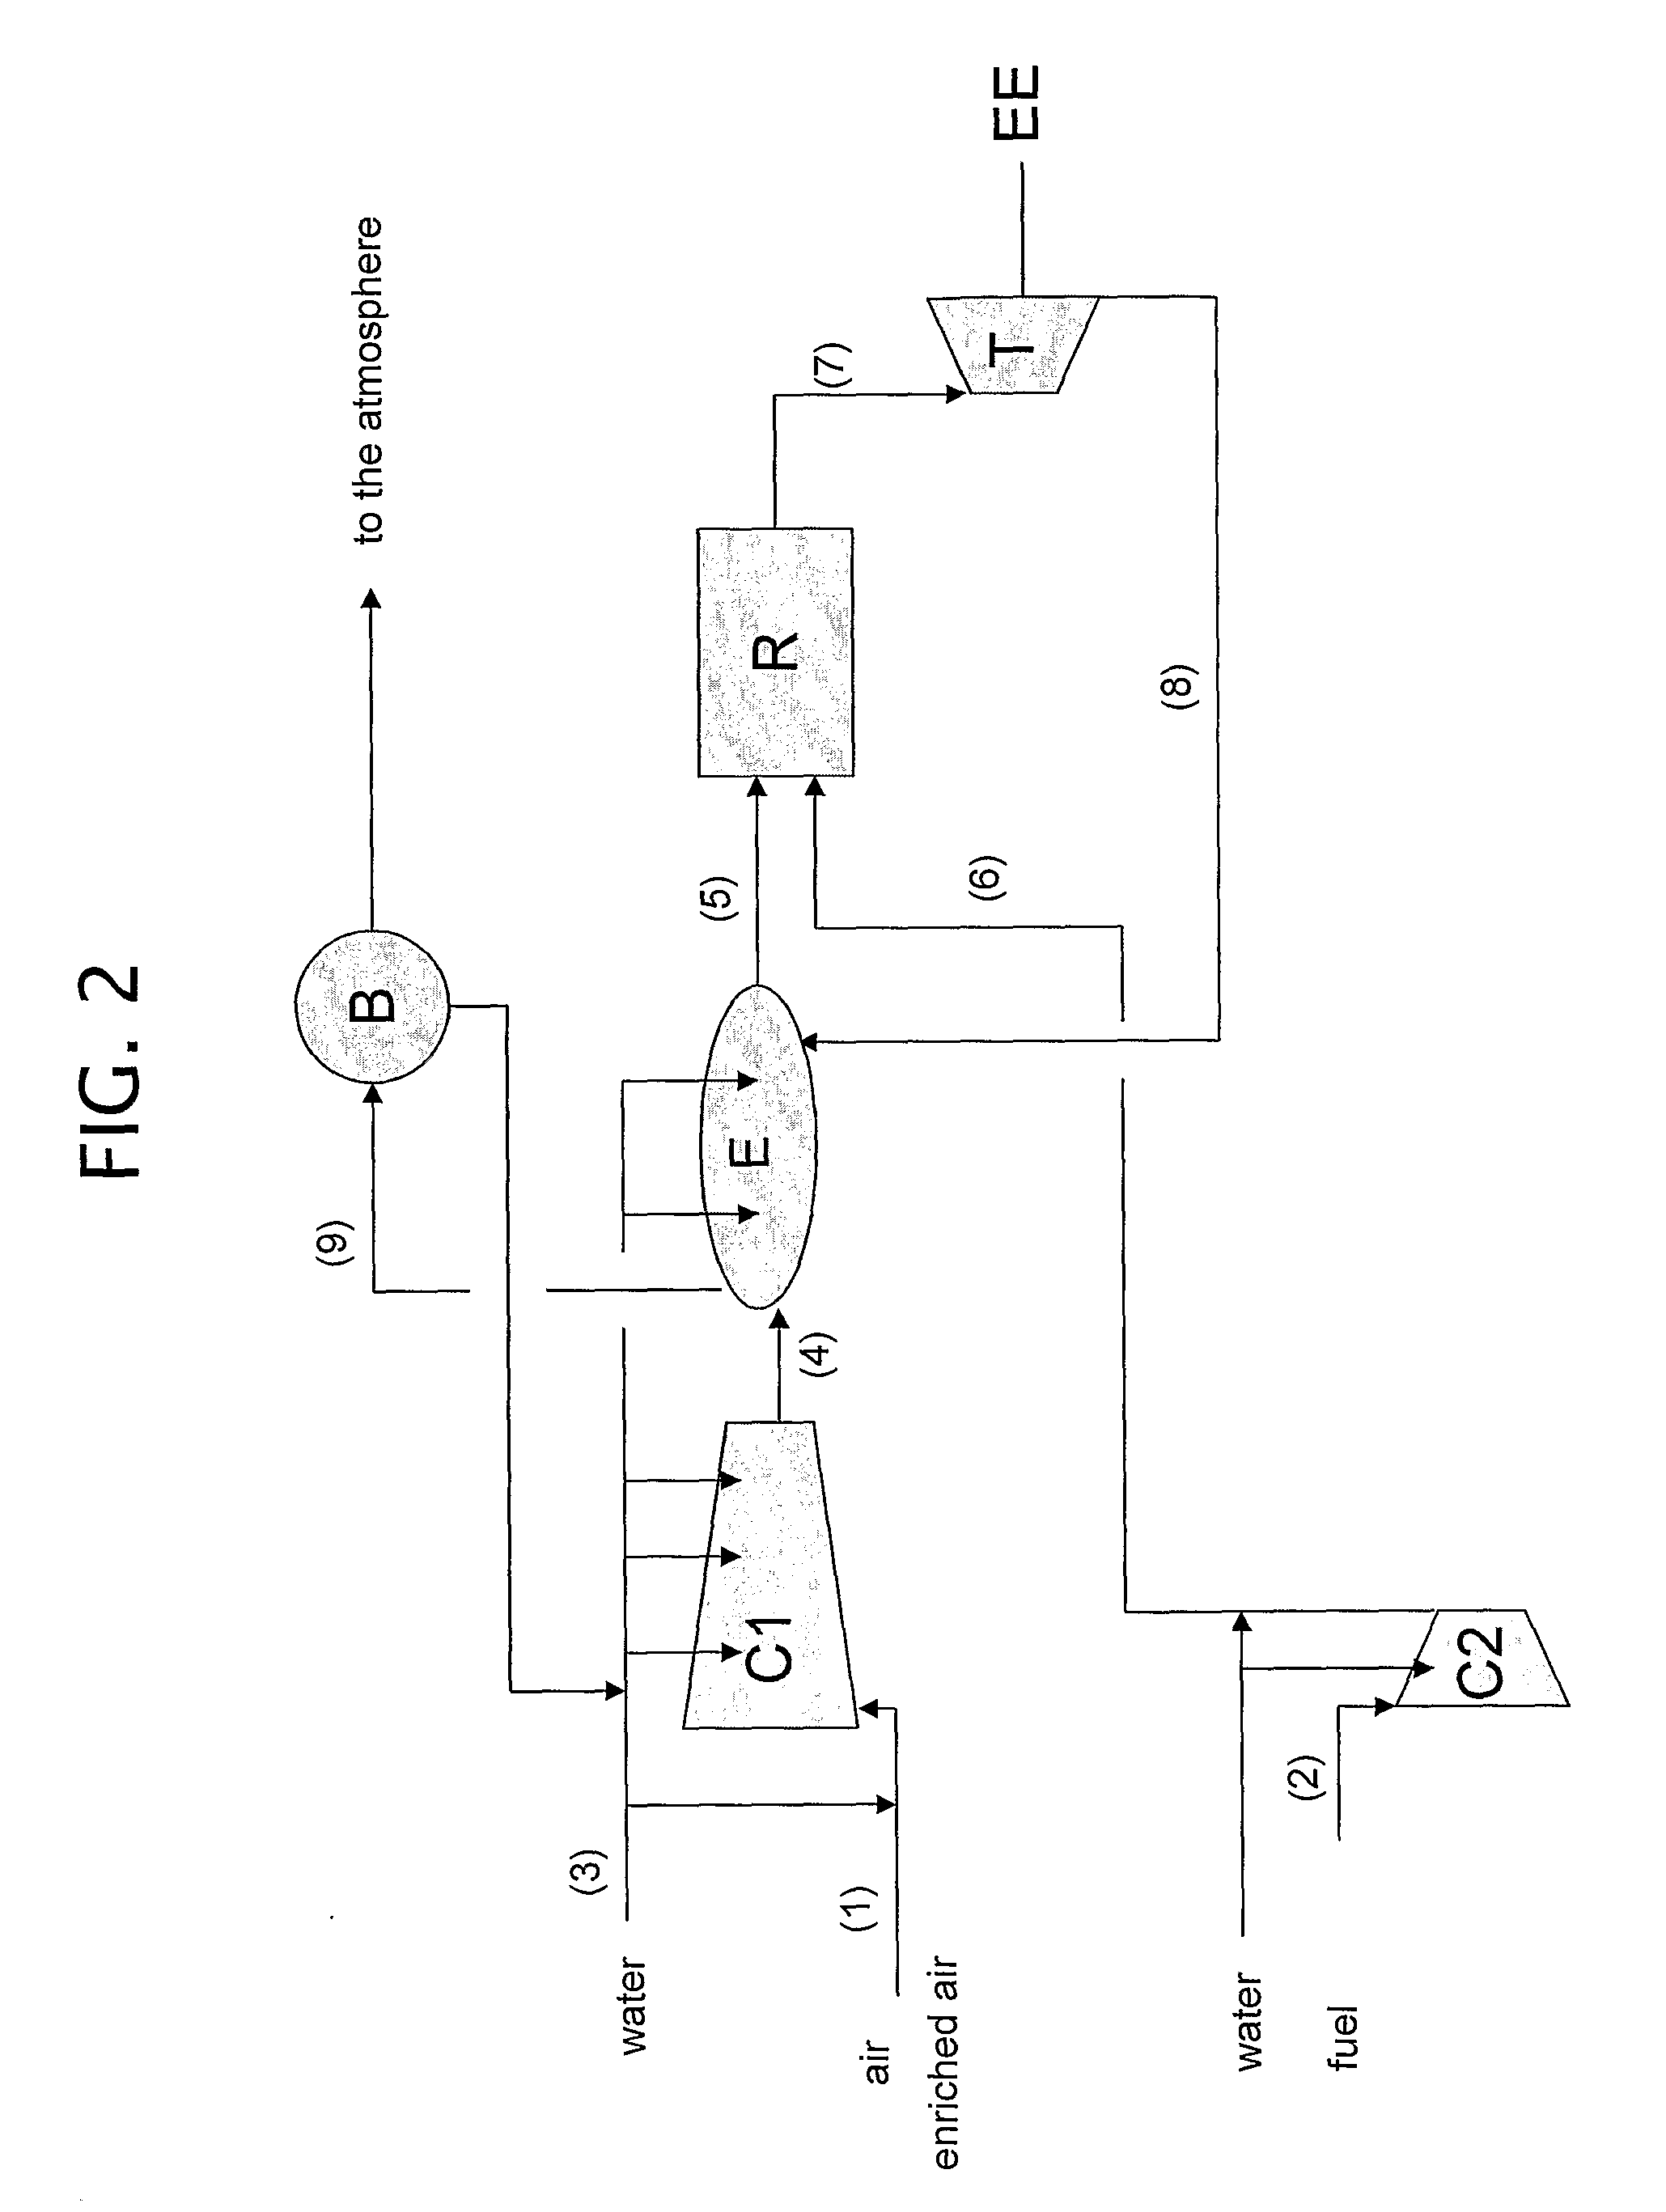 High-efficiency combustors with reduced environmental impact and processes for power generation derivable therefrom